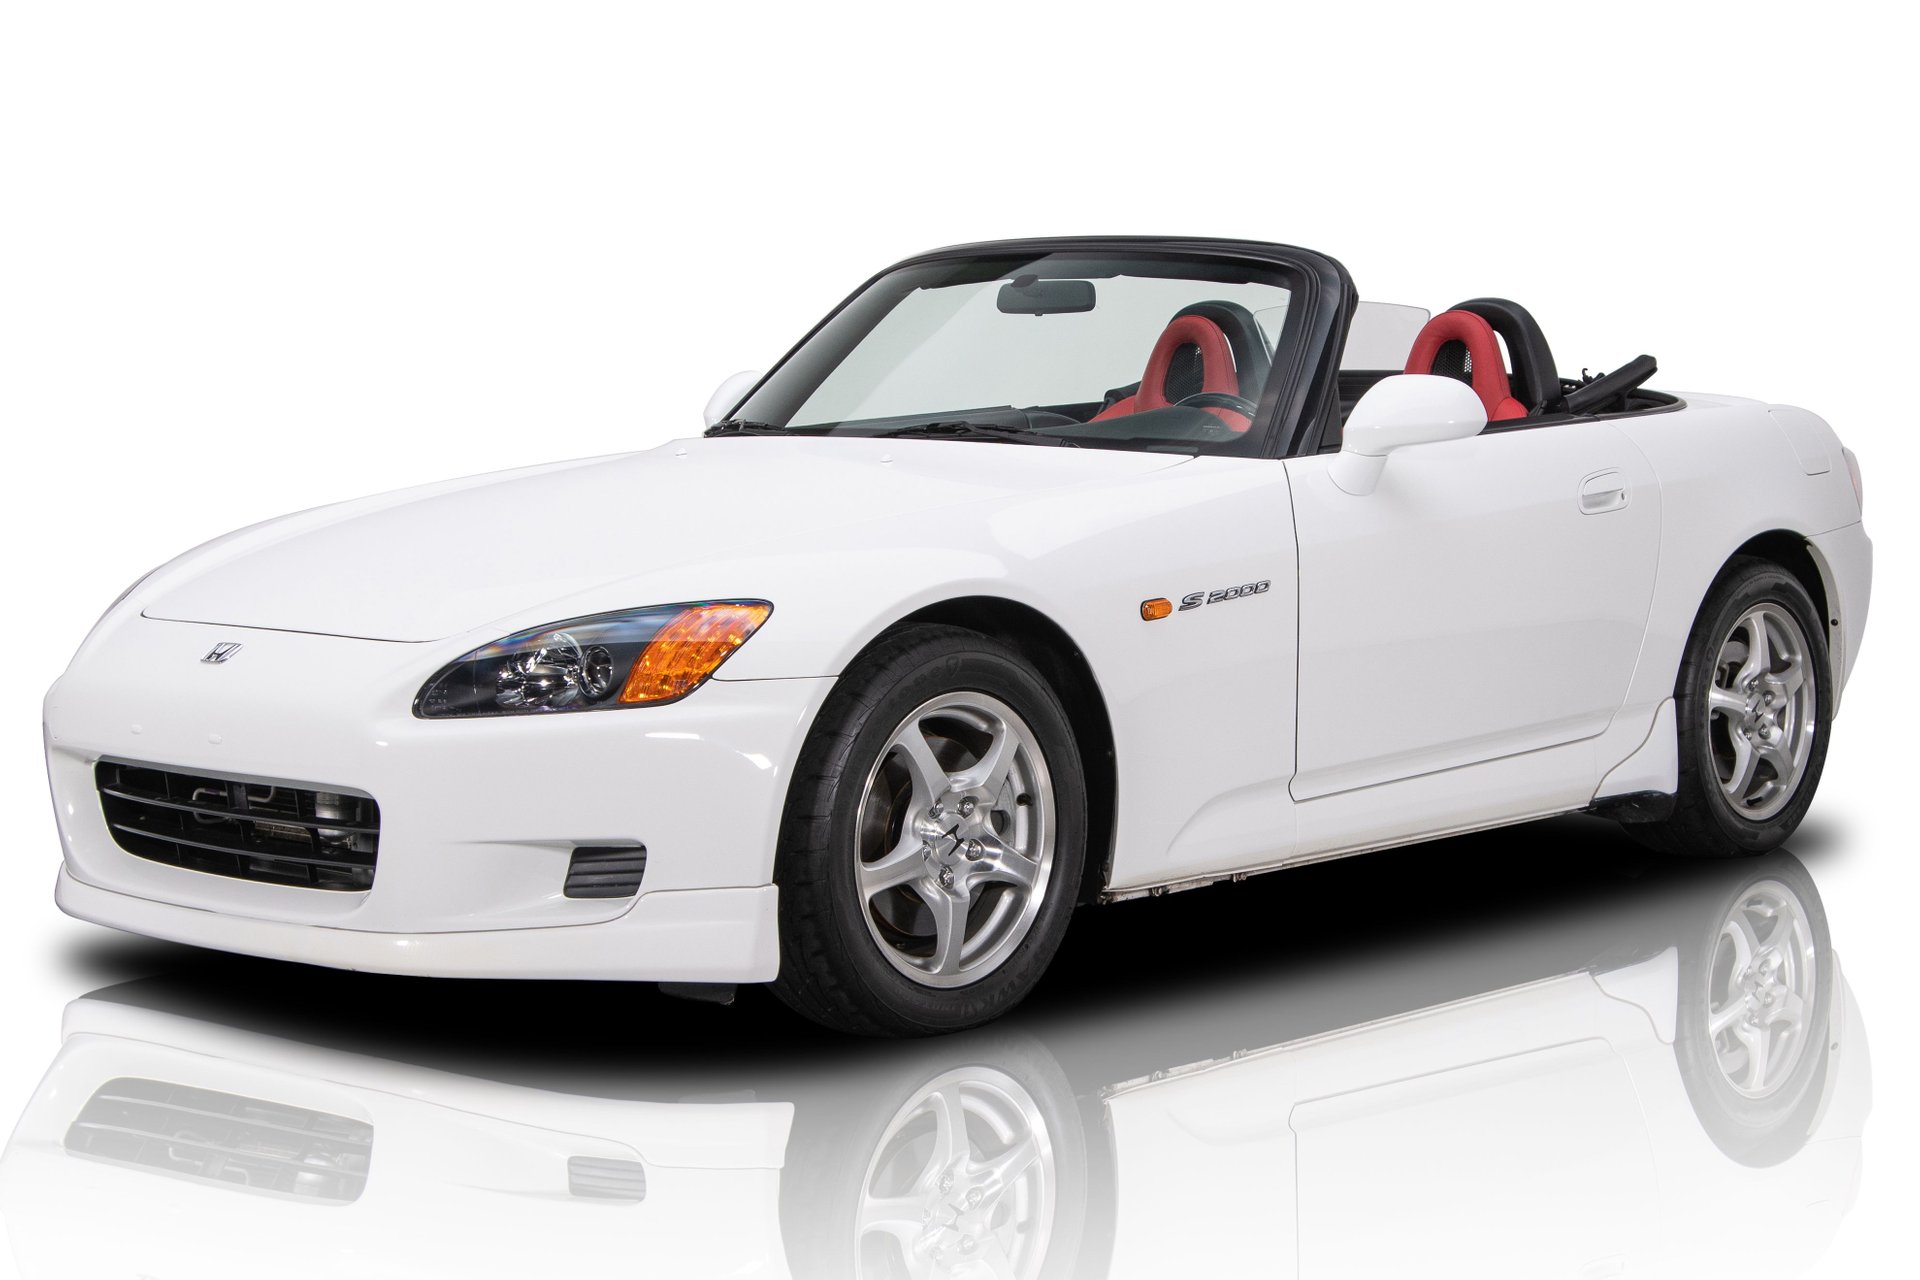 137200 2000 Honda S2000 RK Motors Classic Cars and Muscle Cars for Sale